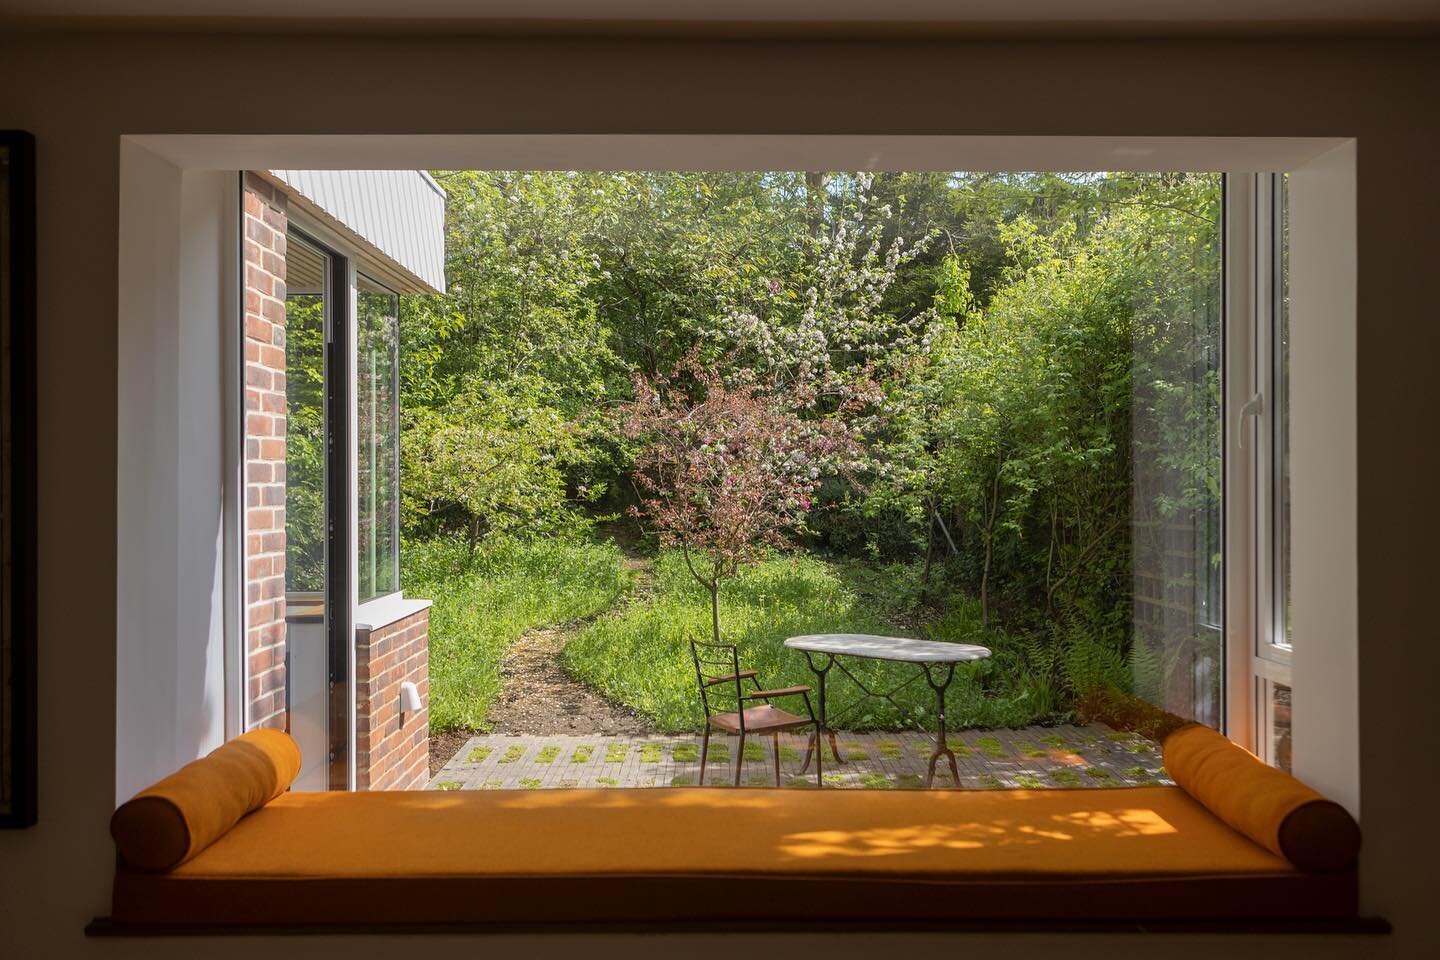 Picture window view of the  Dulwich Wood project with @a_small_studio 
@dwellmagazine article and more images now on the website 
.
.
.
.
.
#gardens #gardendesigner #gardendesigners #londongardens #londongardendesigner #londongardendesigners #landsca